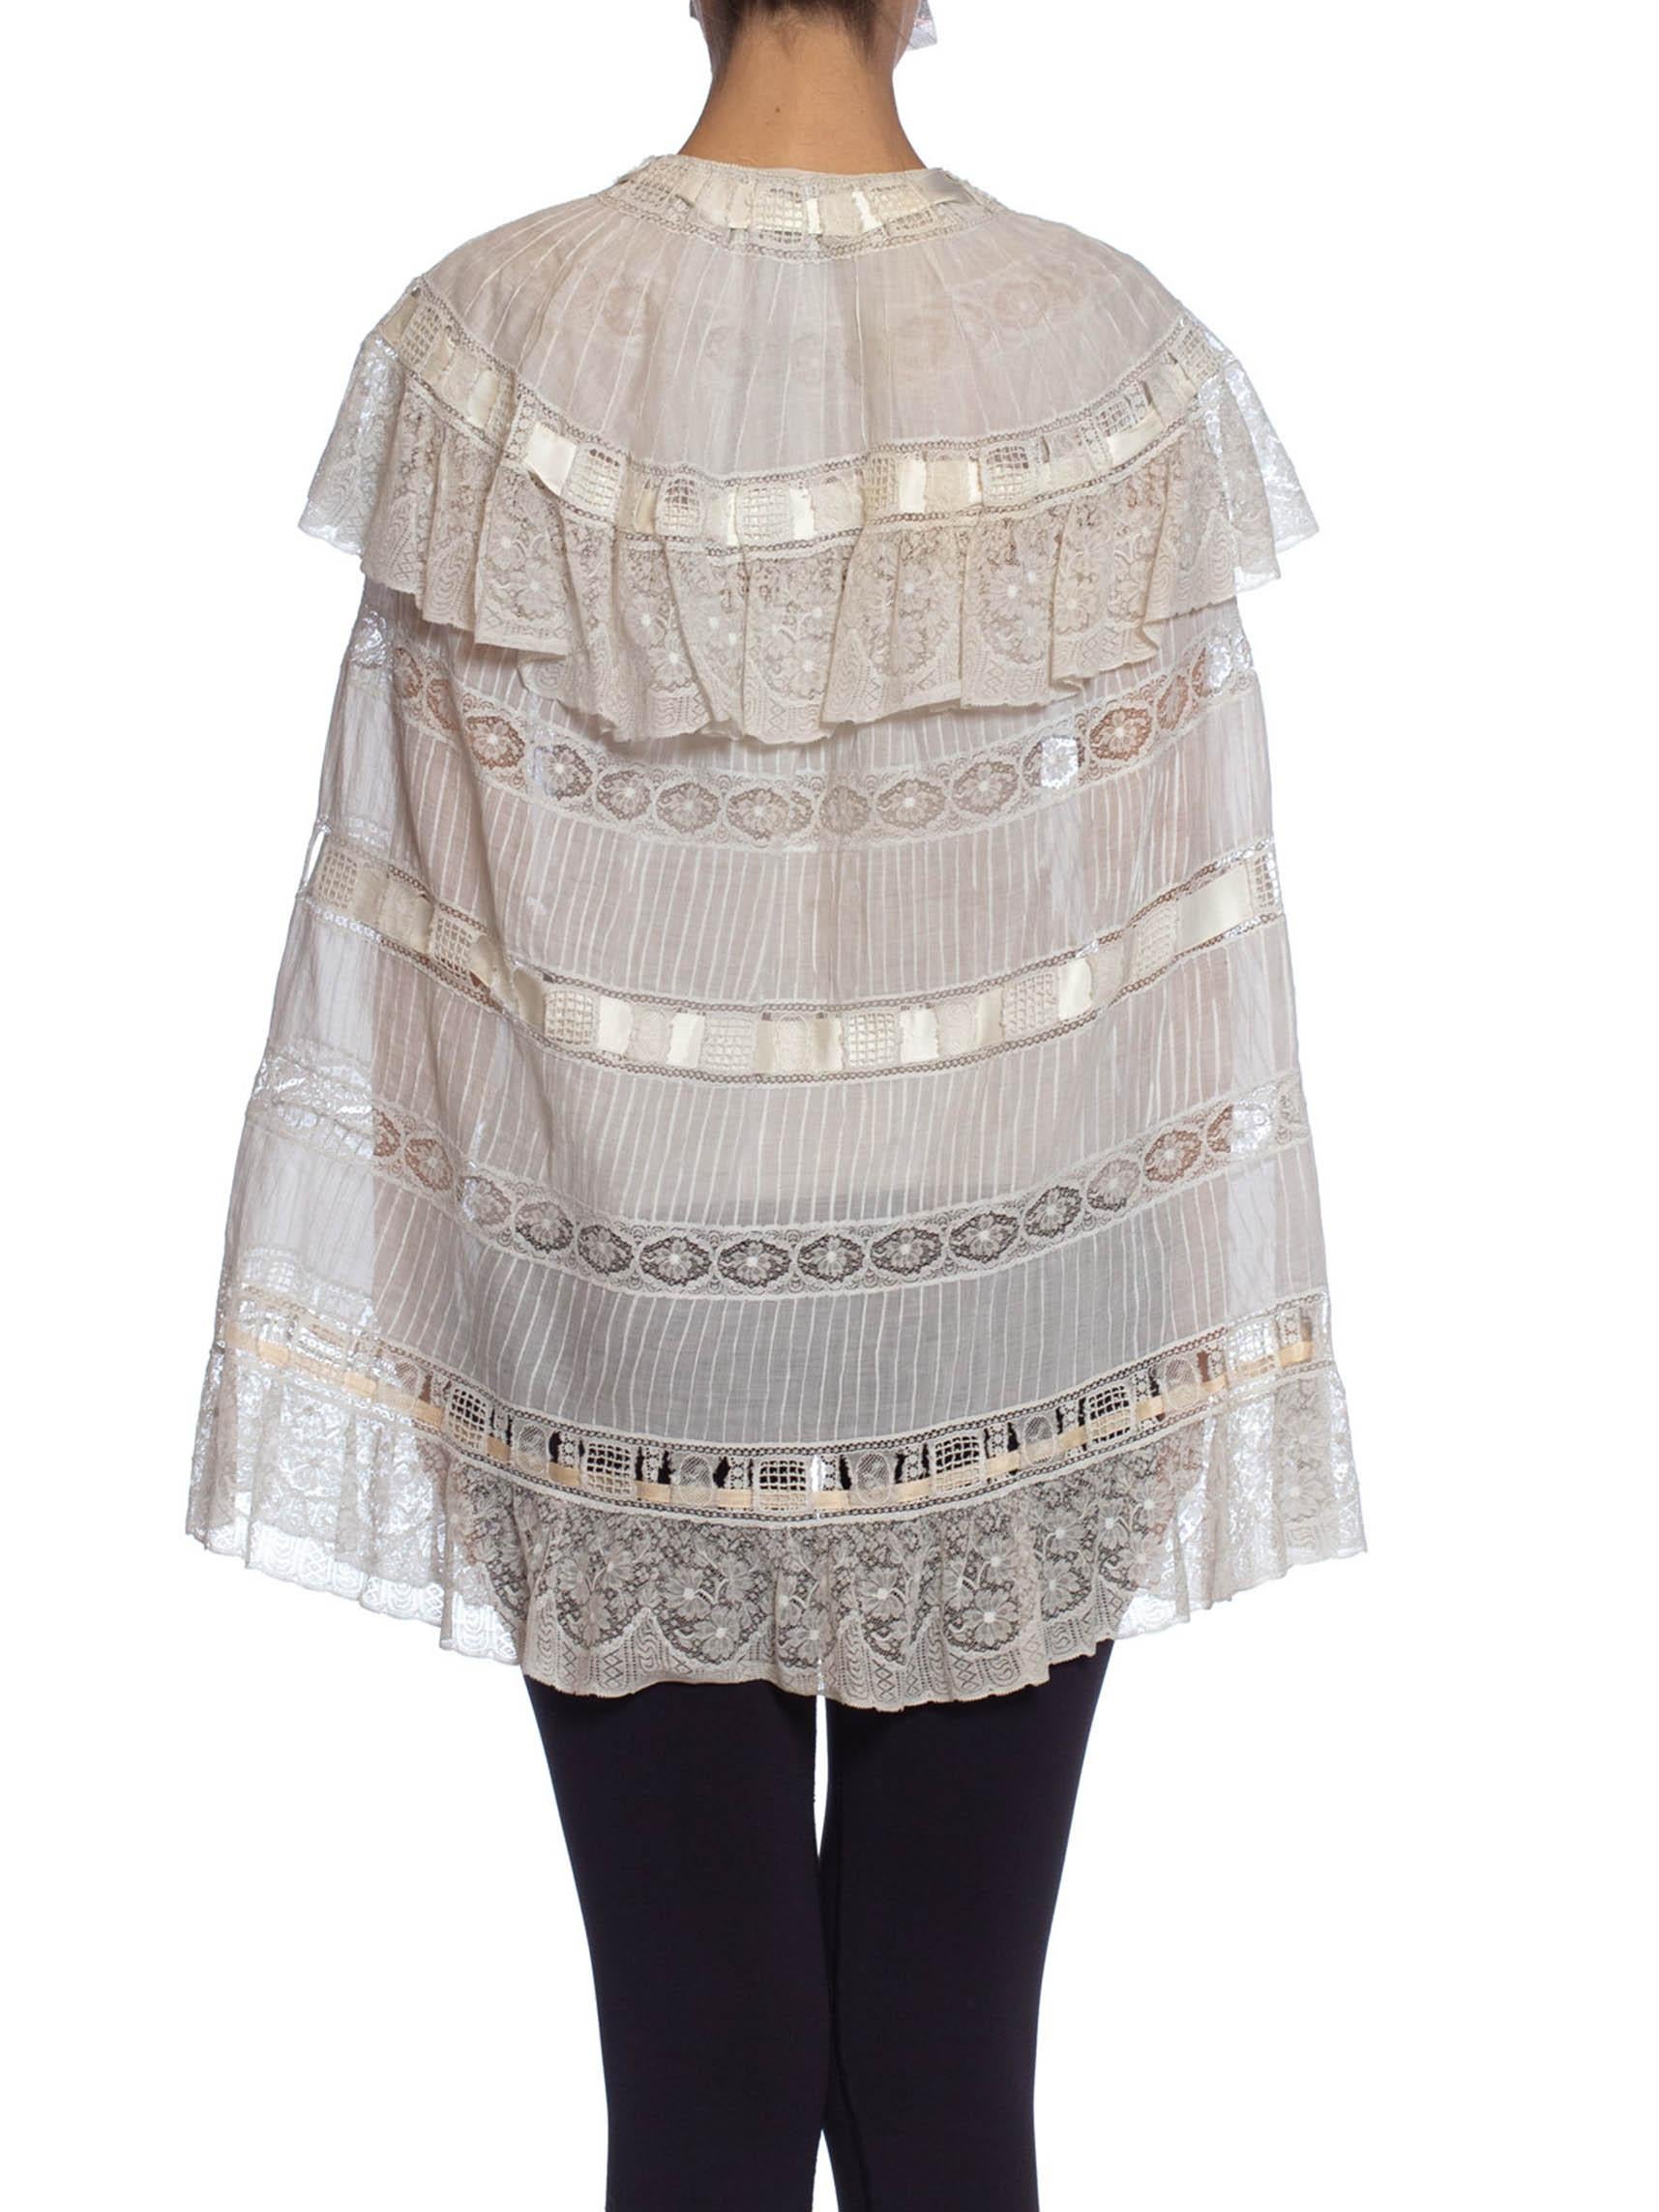 Victorian White Cotton Voile & Lace Cape Entirely Pin-Tucked By Hand From Paris For Sale 1